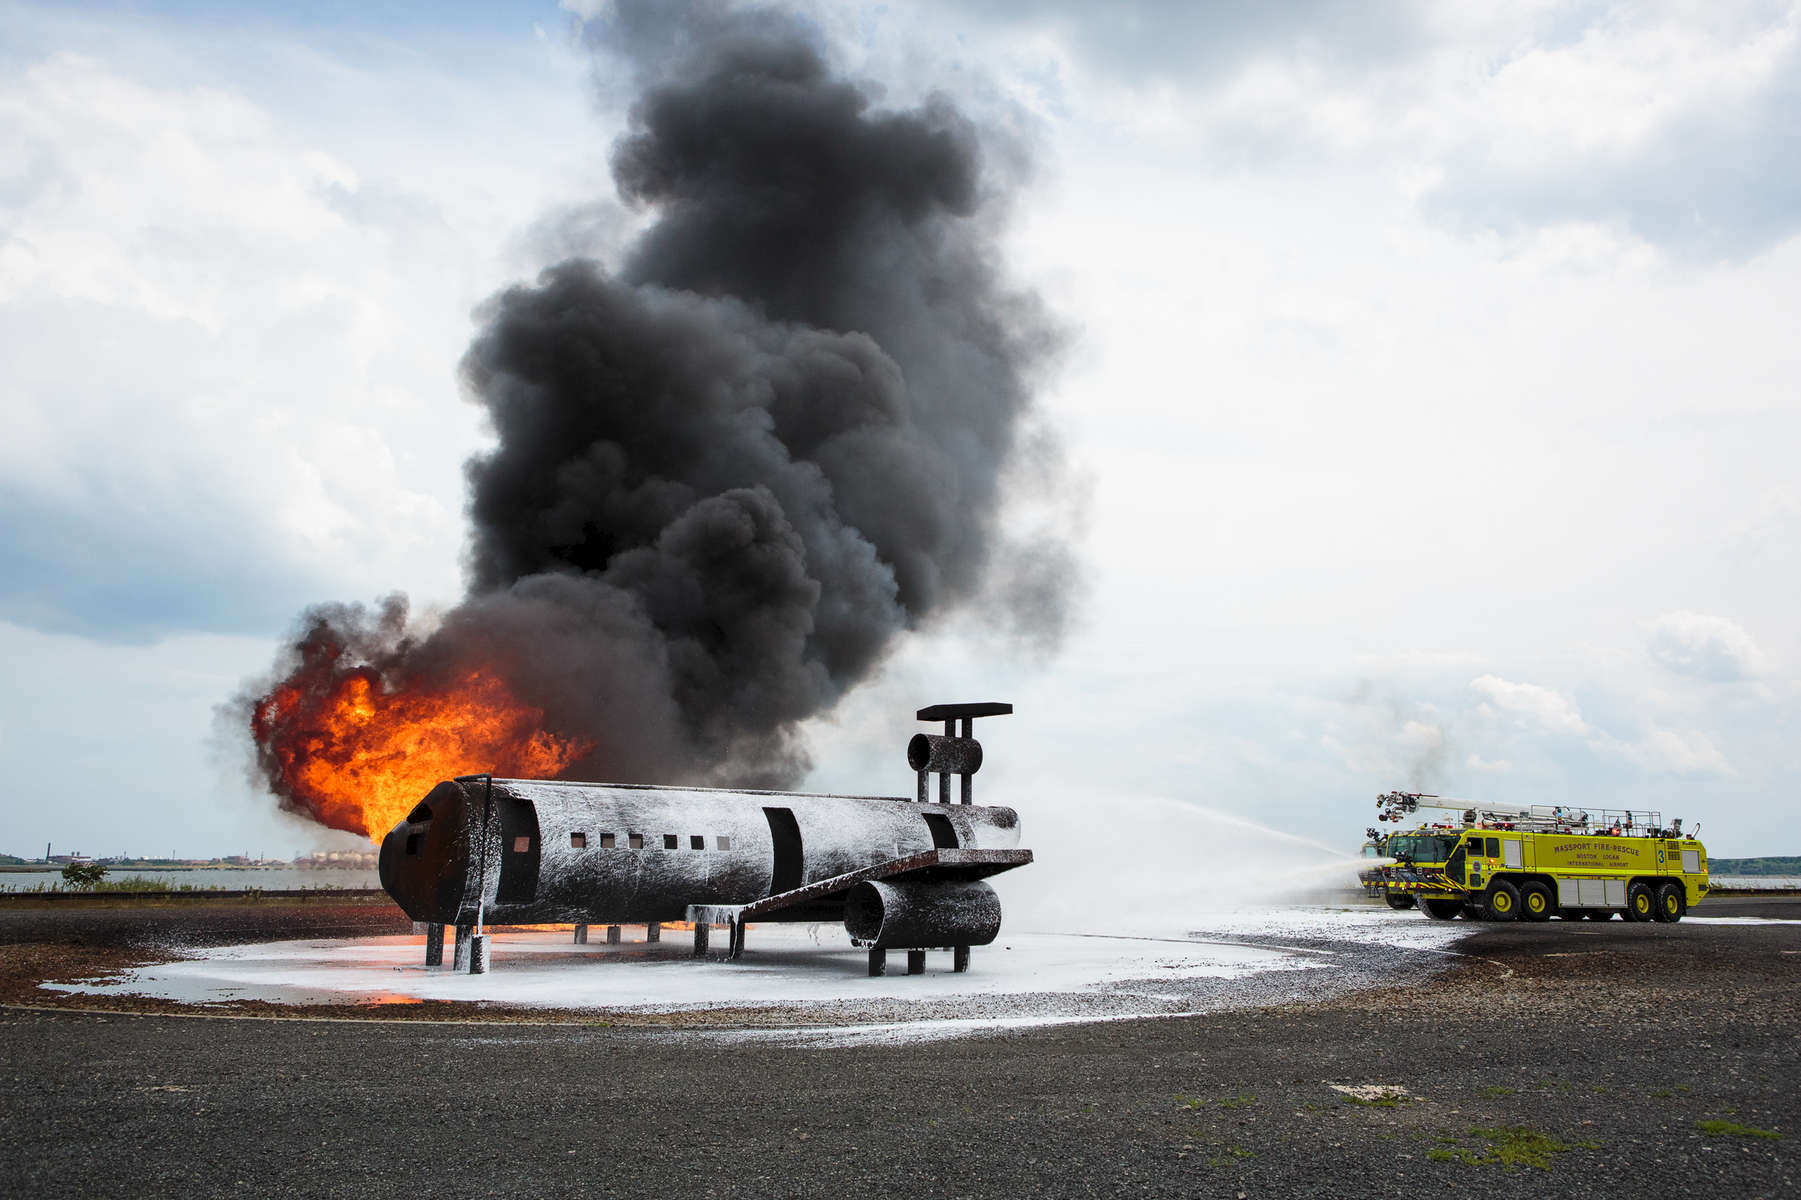 Boston, MA., July 24, 2013: Fire trucks put out a plane fire on a mock plane fuselage during a training session at Boston's Logan Airport. Boston has one of the best airline fighting fighting crews in the nation. Photograph by Evan McGlinn for The New York Times.